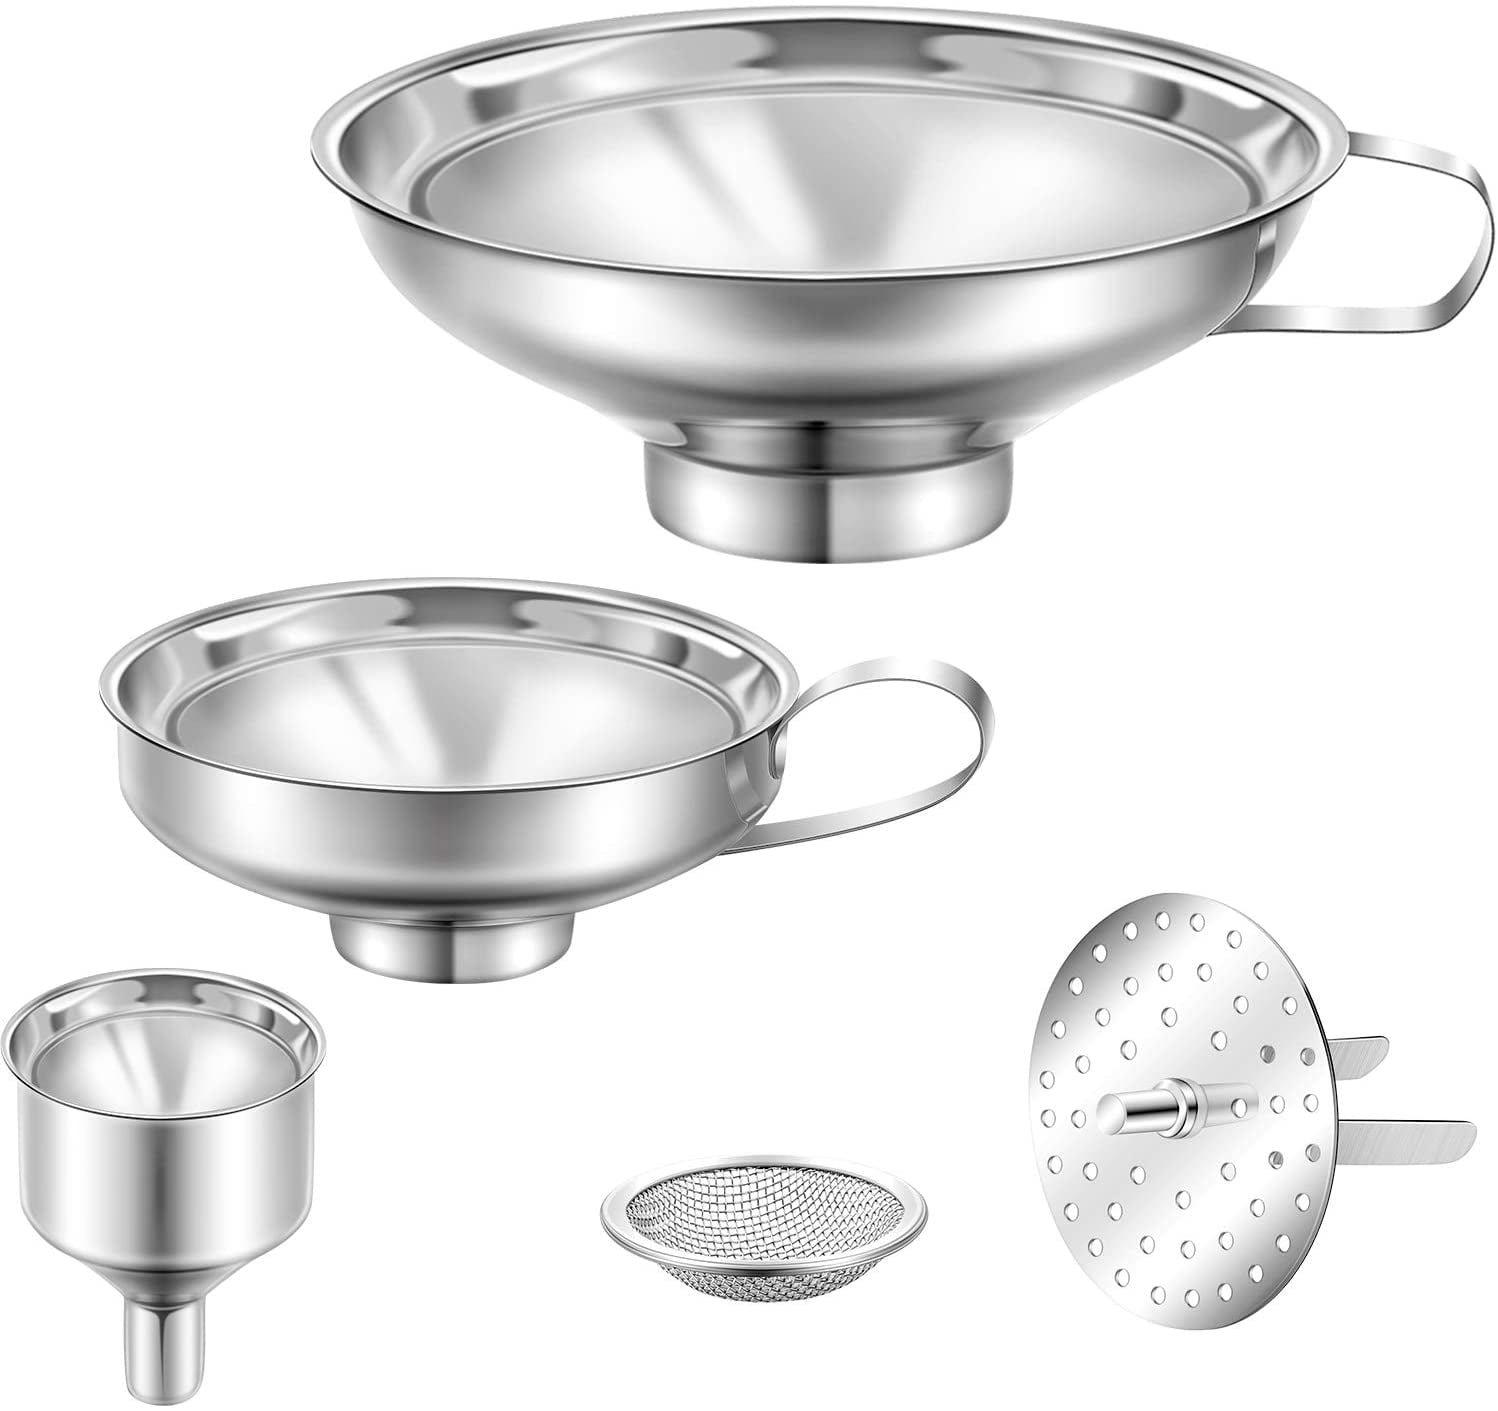 5 Pieces Stainless Steel Funnels Set Canning Funnel Fine Mesh Strainer Mesh  Filter Compatible with Wide and Regular Narrow Mouth Mason Jar - Walmart.com